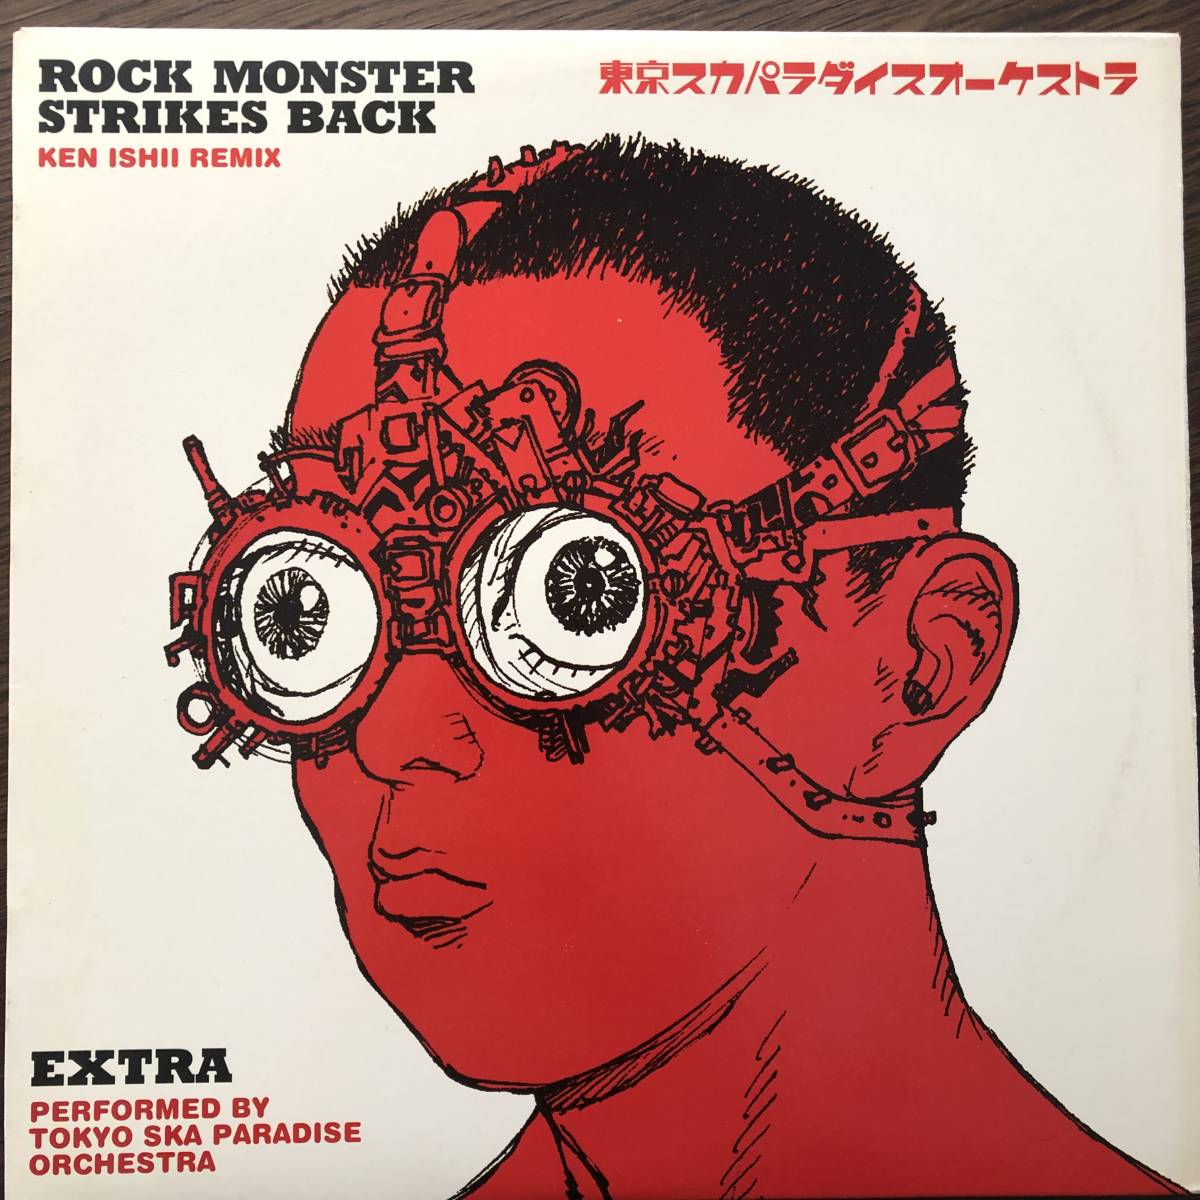 ROCK MONSTER STRIKES BACK / Tokyo Ska Paradise Orchestra 12 -inch record ticket *isii large ...